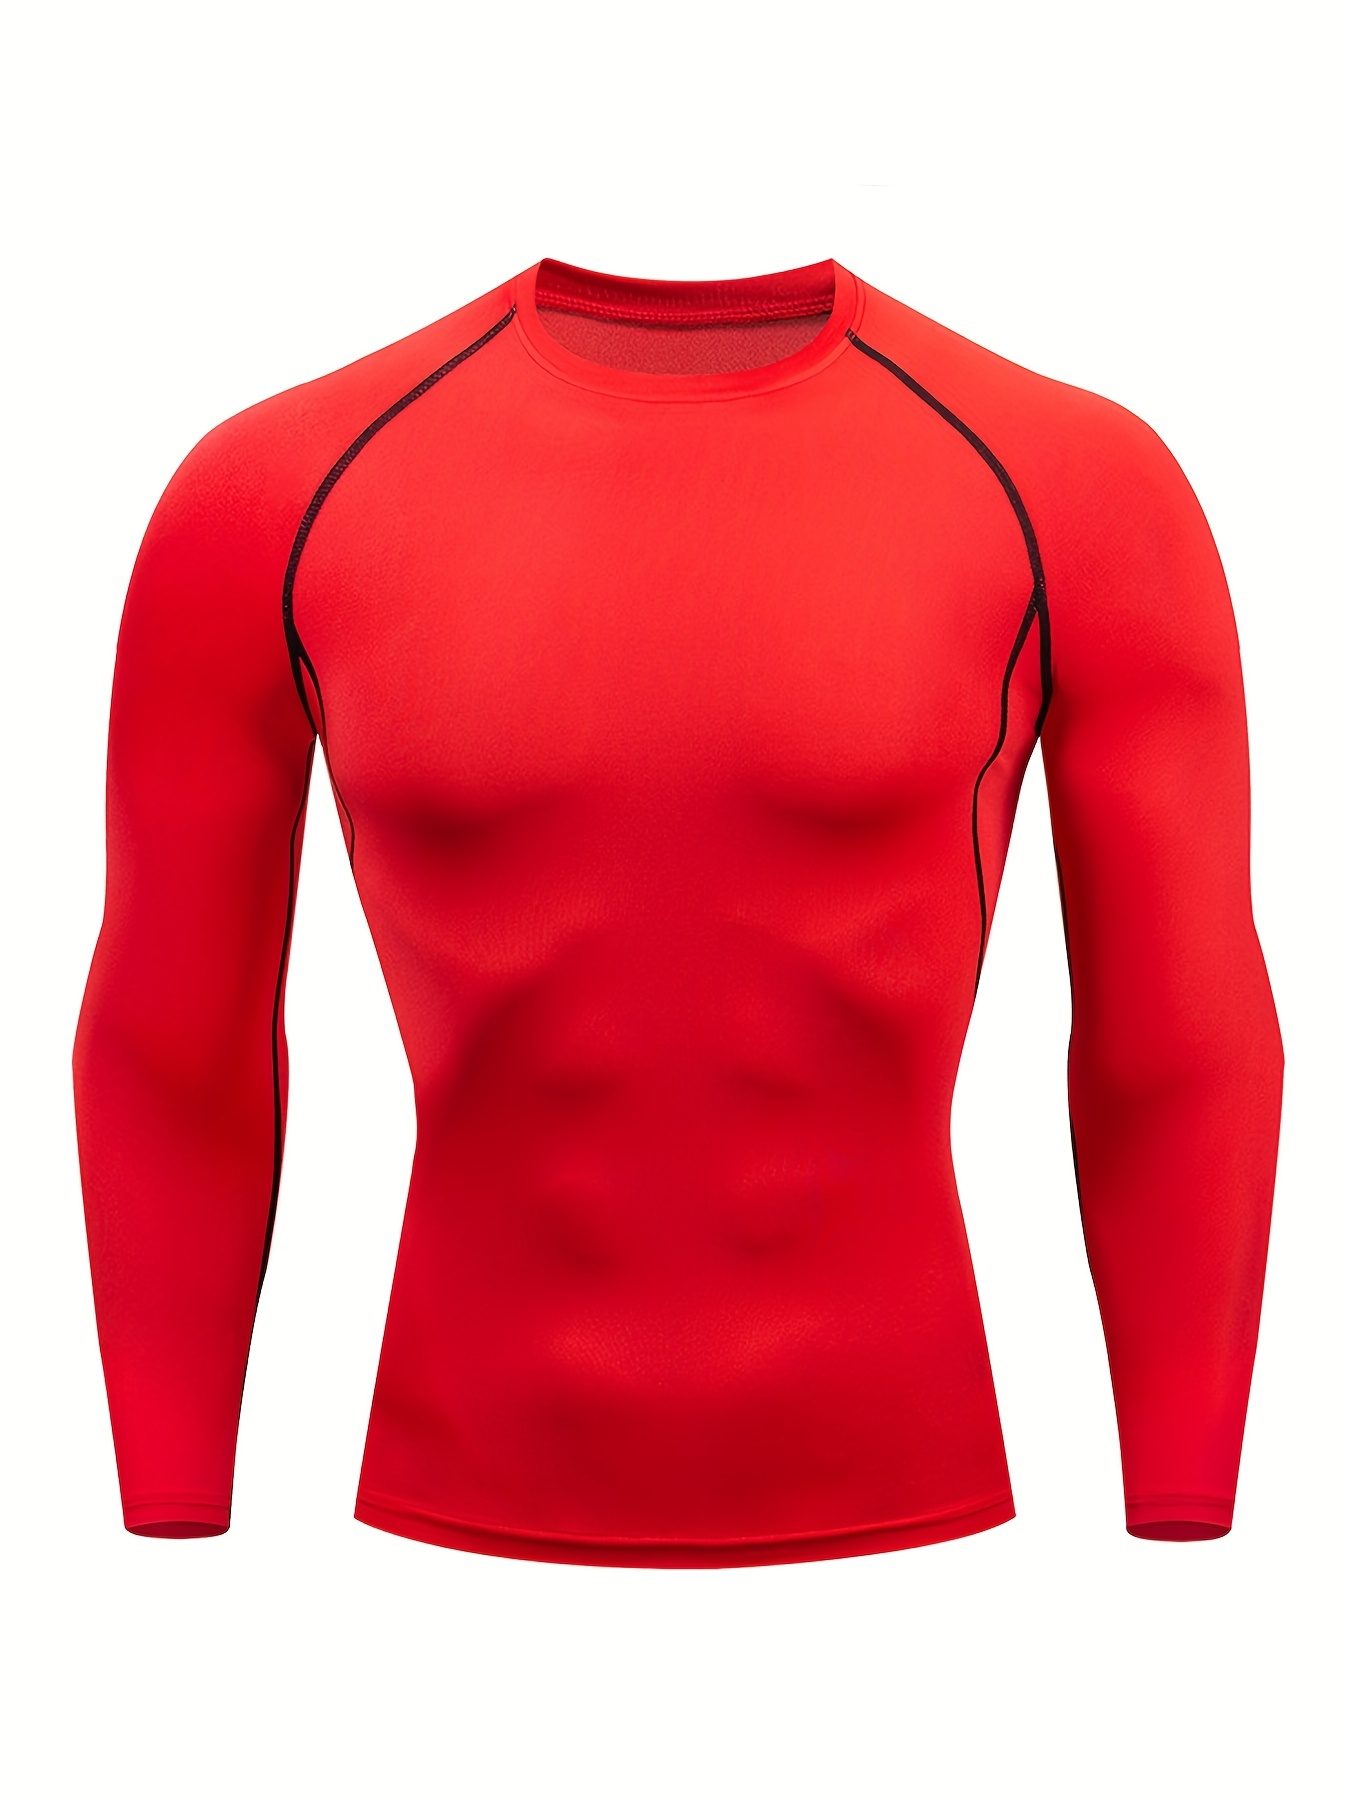 Buy Women's Compression Shirt Dry Fit Long Sleeve Running Athletic